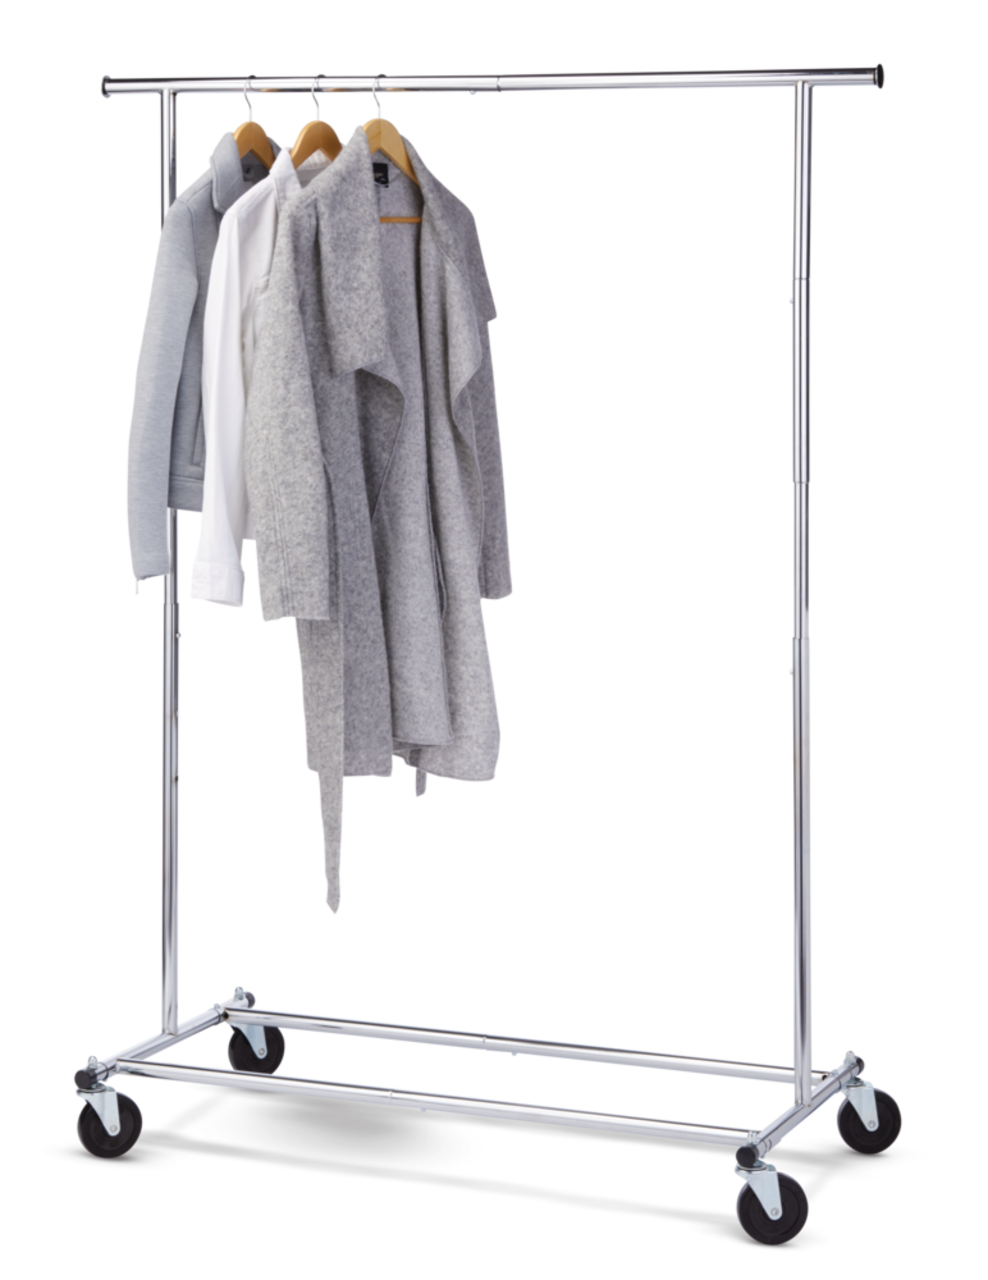 type A Radiant Commercial Adjustable Freestanding Clothing Rack